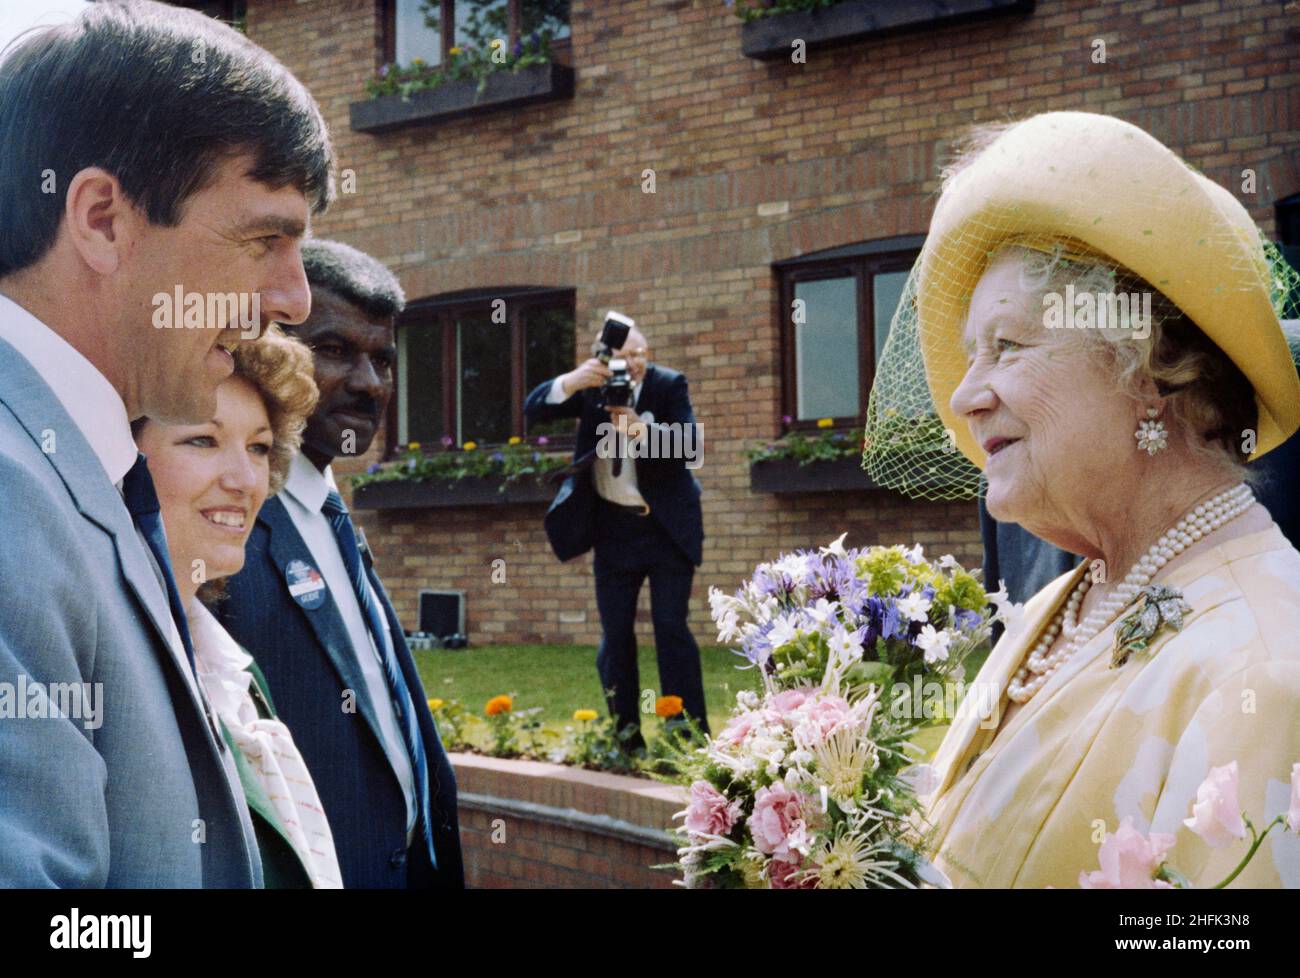 Four Limes, Wheathampstead, St. Albans, Hertfordshire, 07/05/1986. The Queen Mother in conversation with Laing Retirement Homes staff at the opening of the Four Limes retirement complex. Laing announced the contract to construct 44 one and two bedroom flats and 6 two bedroom bungalows in June 1985 and the retirement complex was largely complete by the official opening by the Queen Mother in May 1986.  One of the homes in the complex was the 3 millionth to be built under the auspices of the National House Building Council's 10 year warranty scheme, in its 50th year.  A large 17th century house Stock Photo